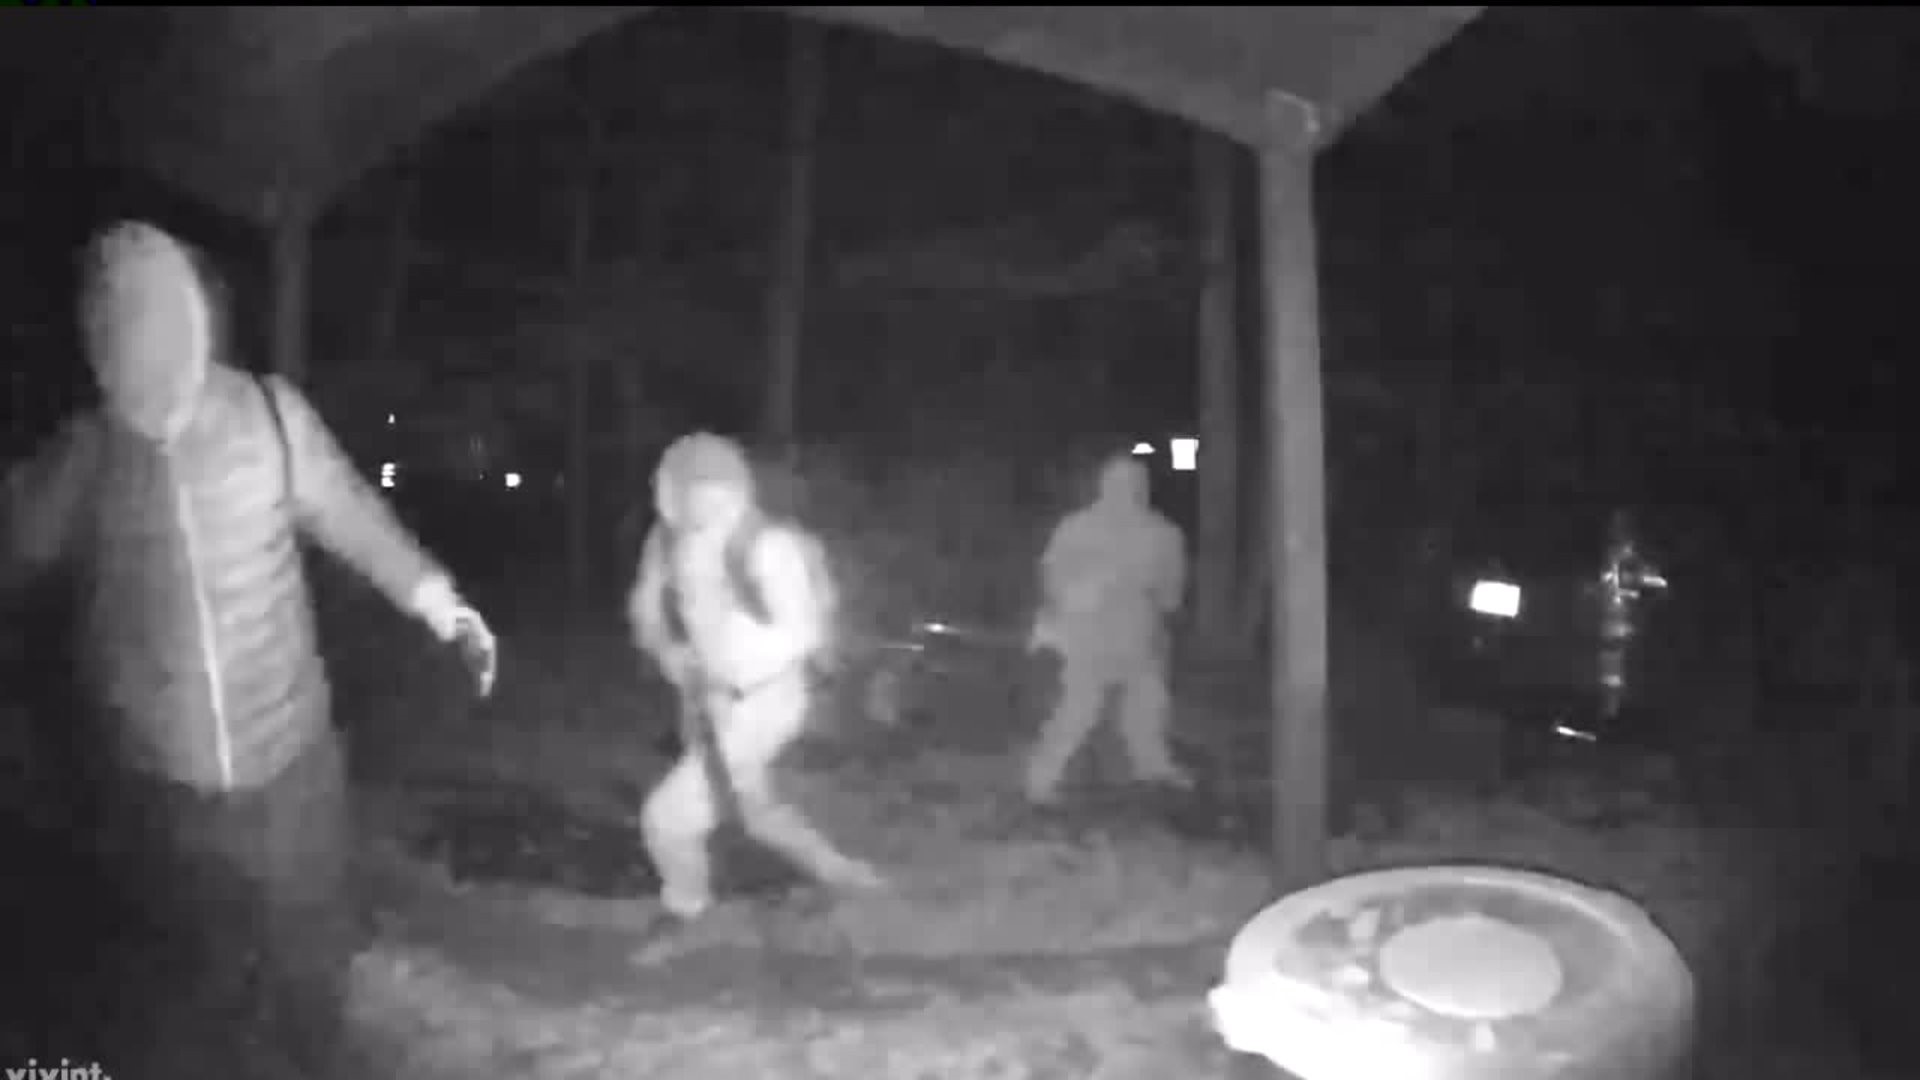 Police Looking for Attempted Break-In Suspects